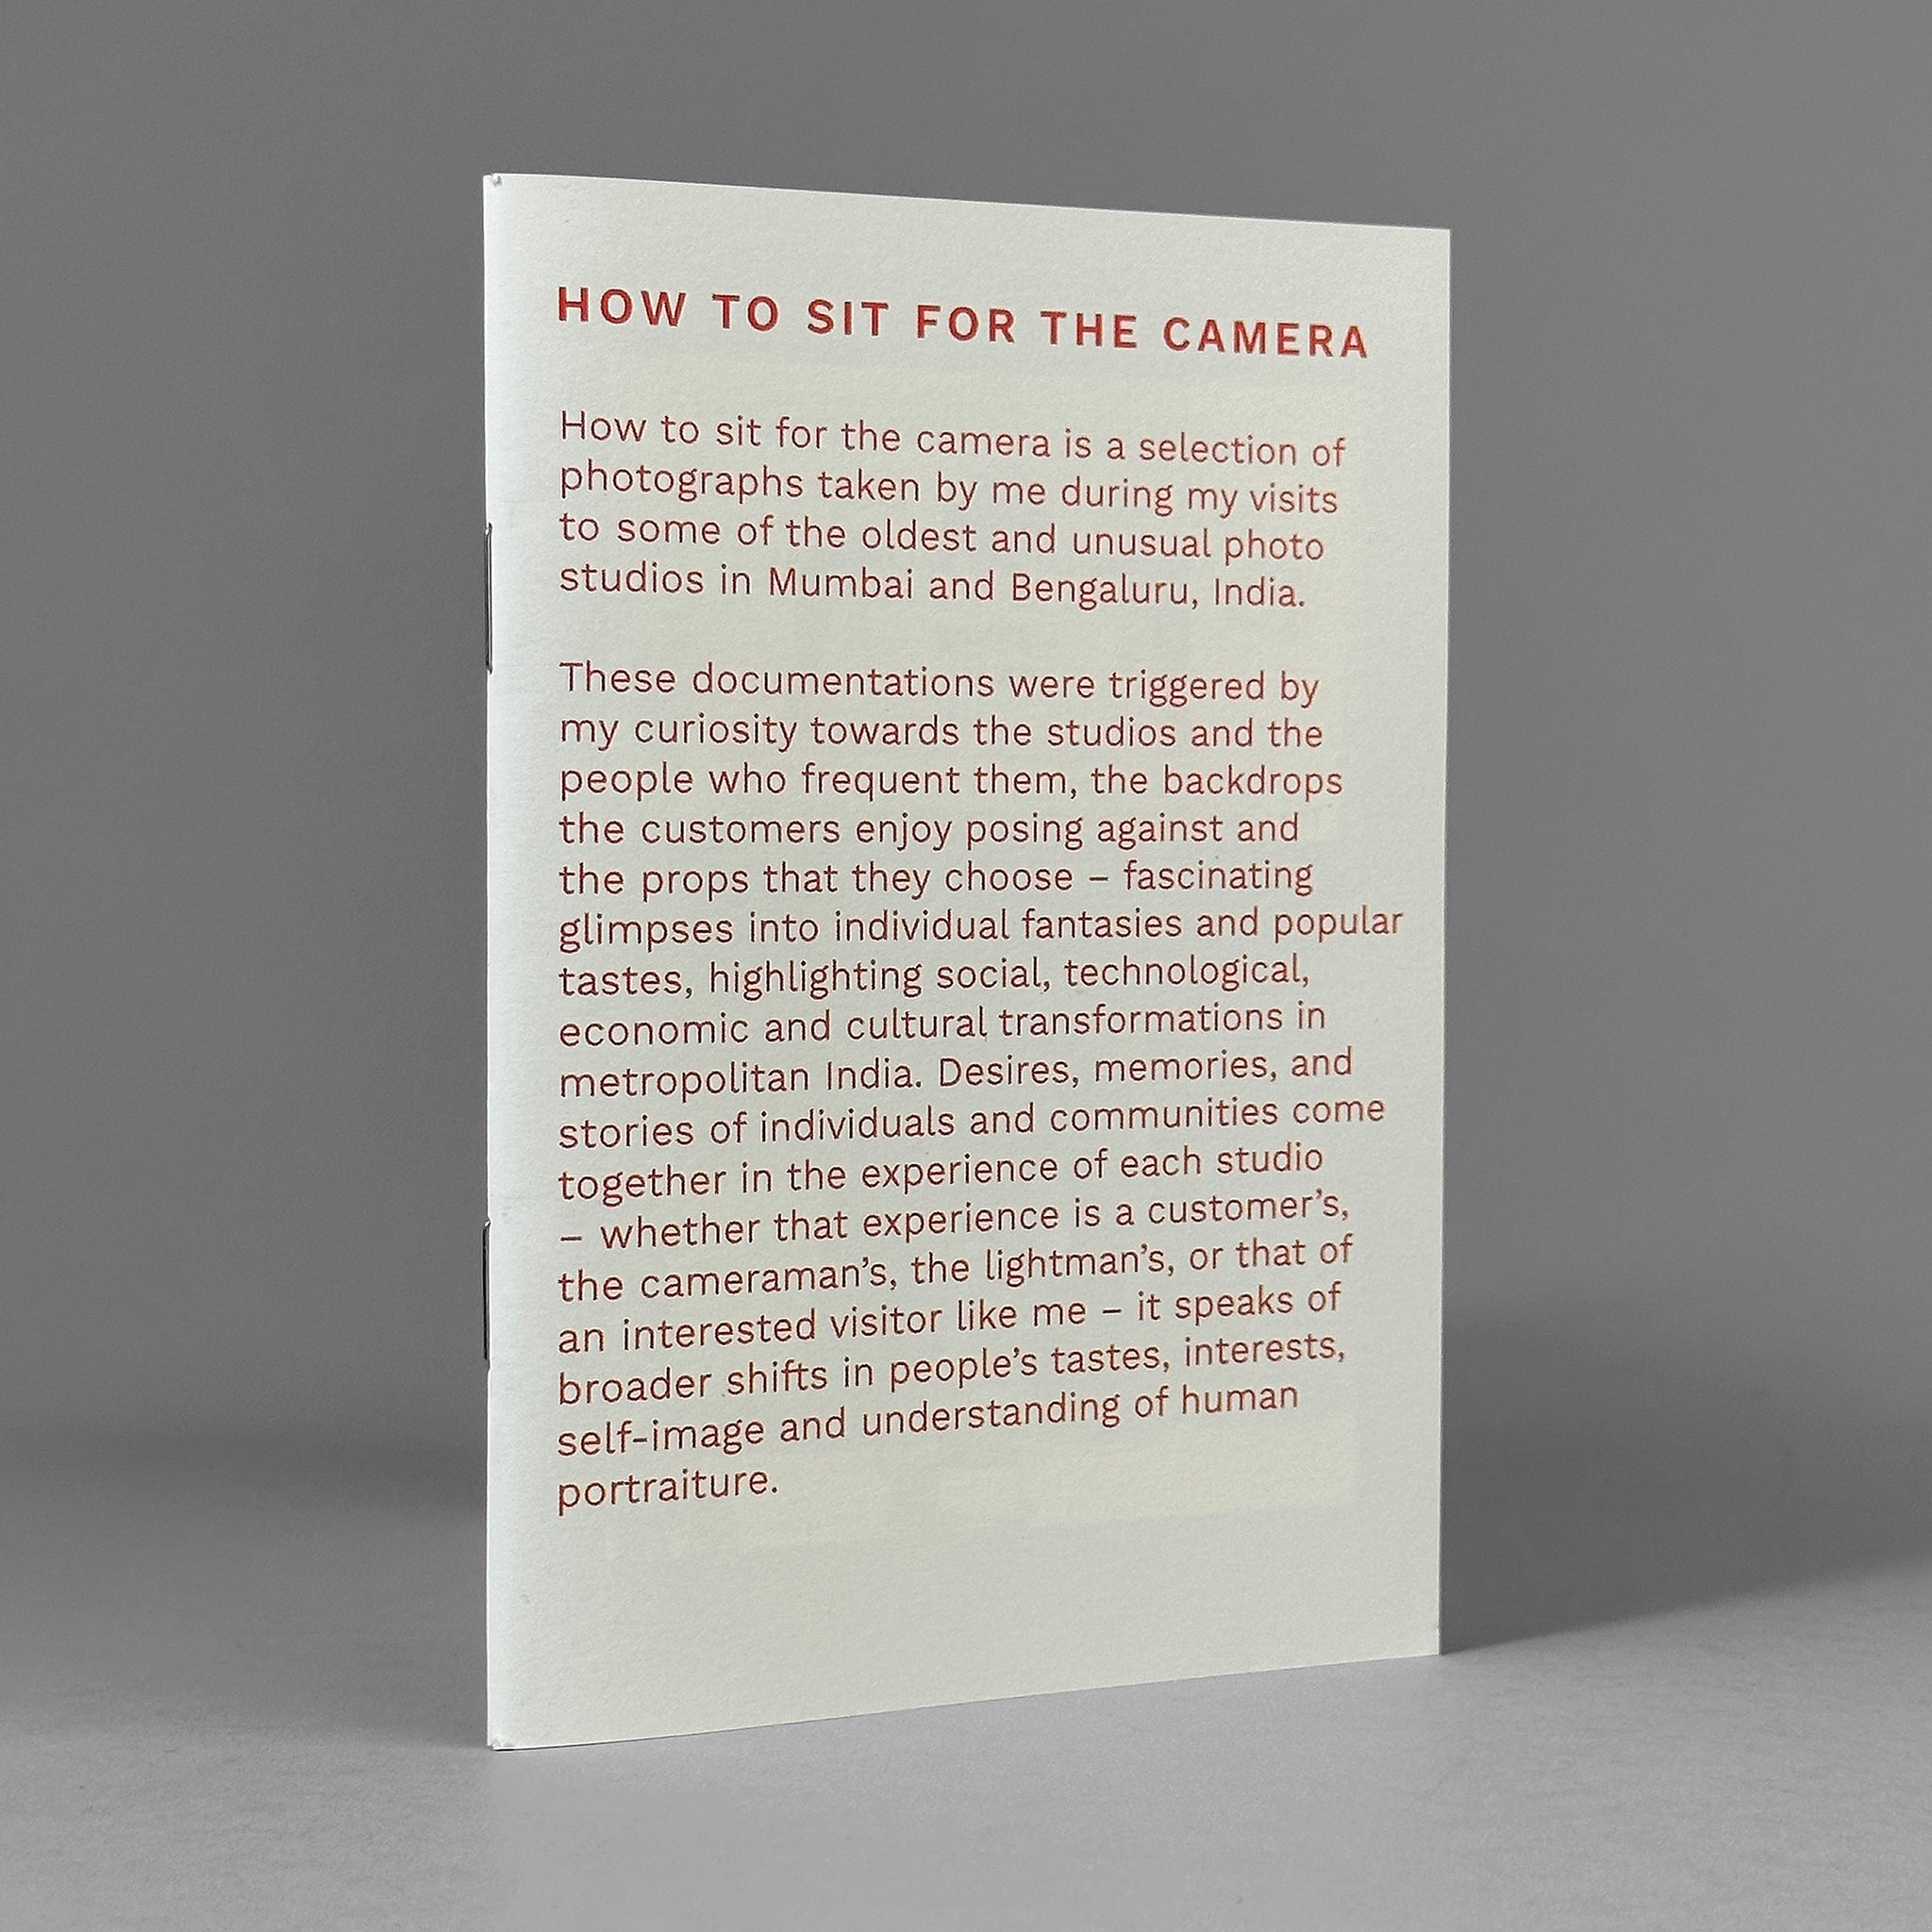 How to Sit For the Camera / Shruti Chamaria